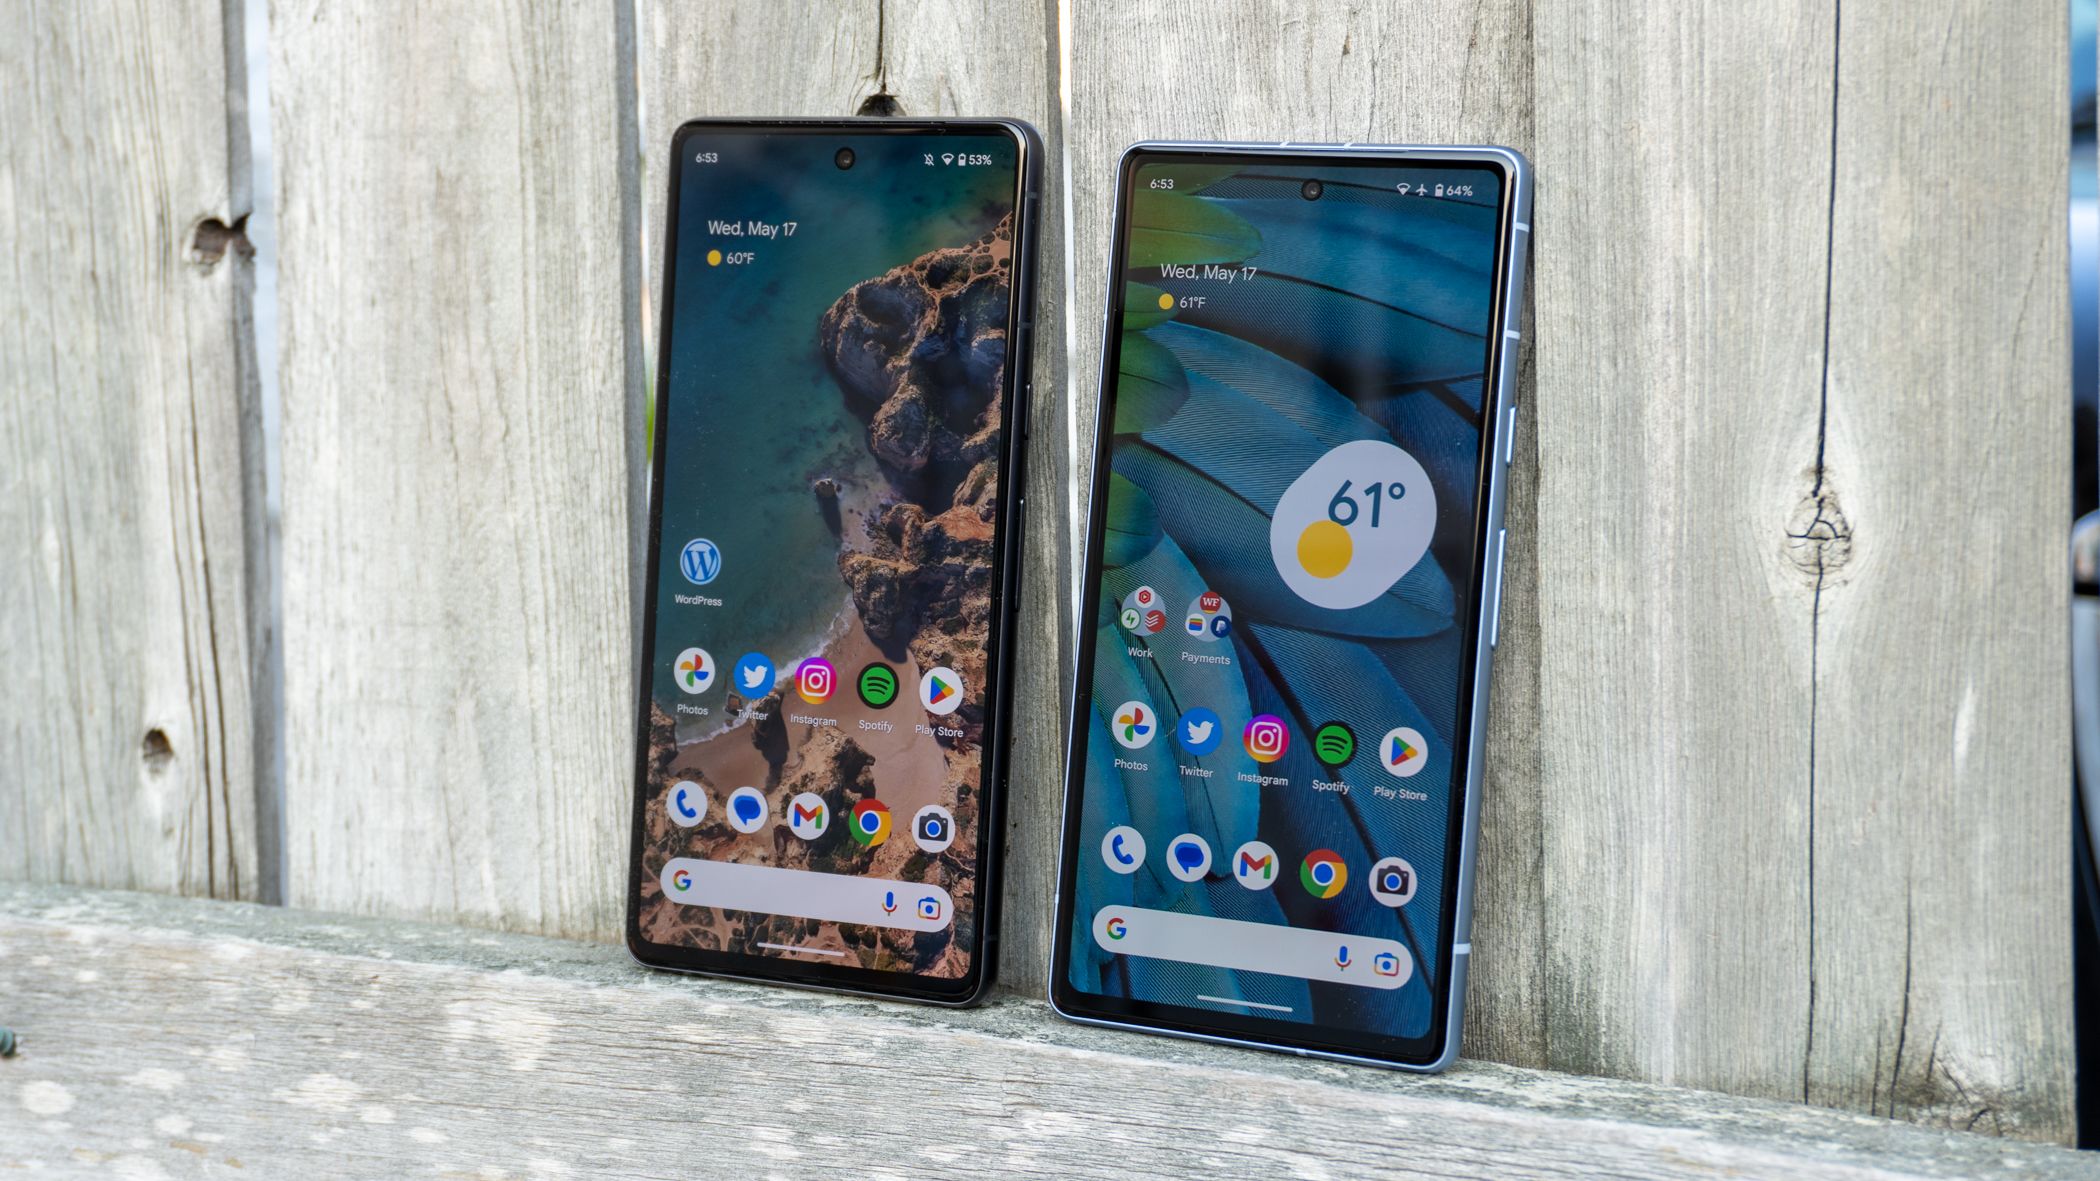 Google Pixel 7a — 5 reasons to buy and 2 reasons to skip